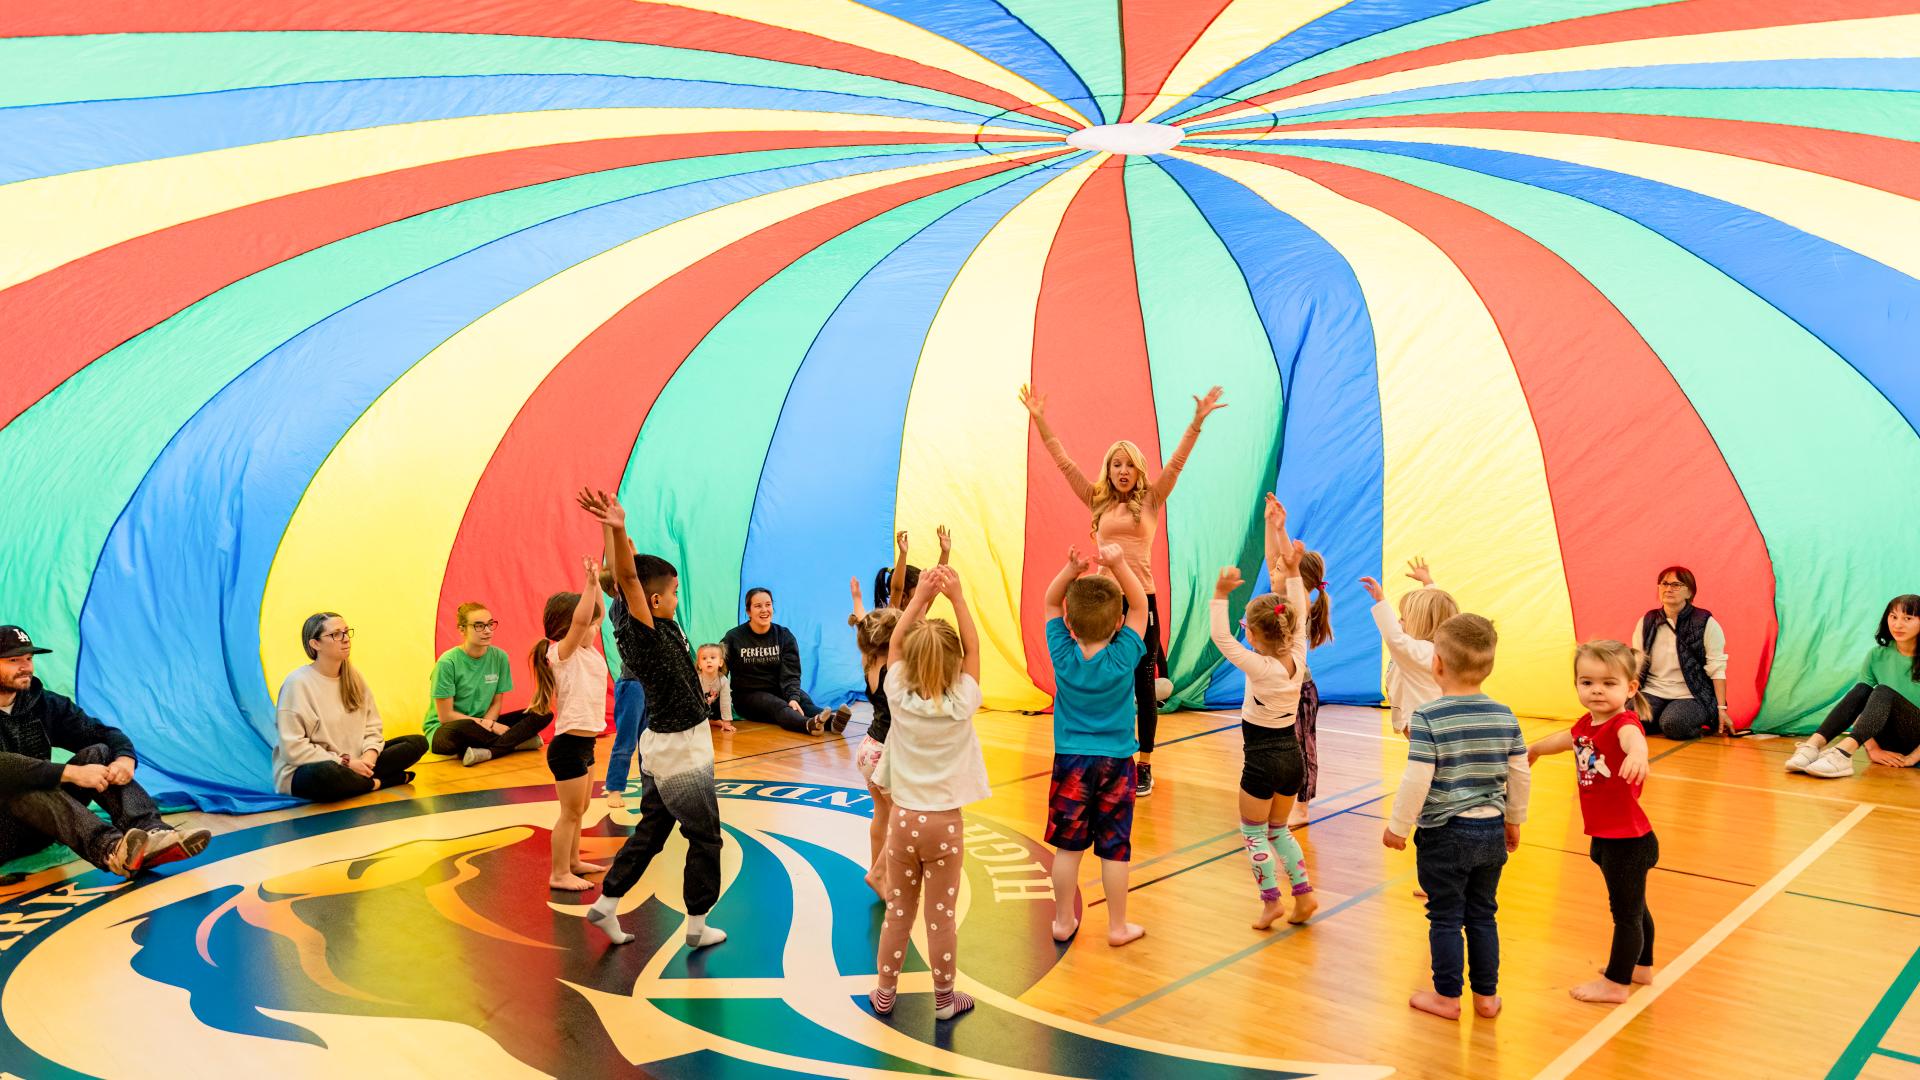 Kids Playing in a Parachute